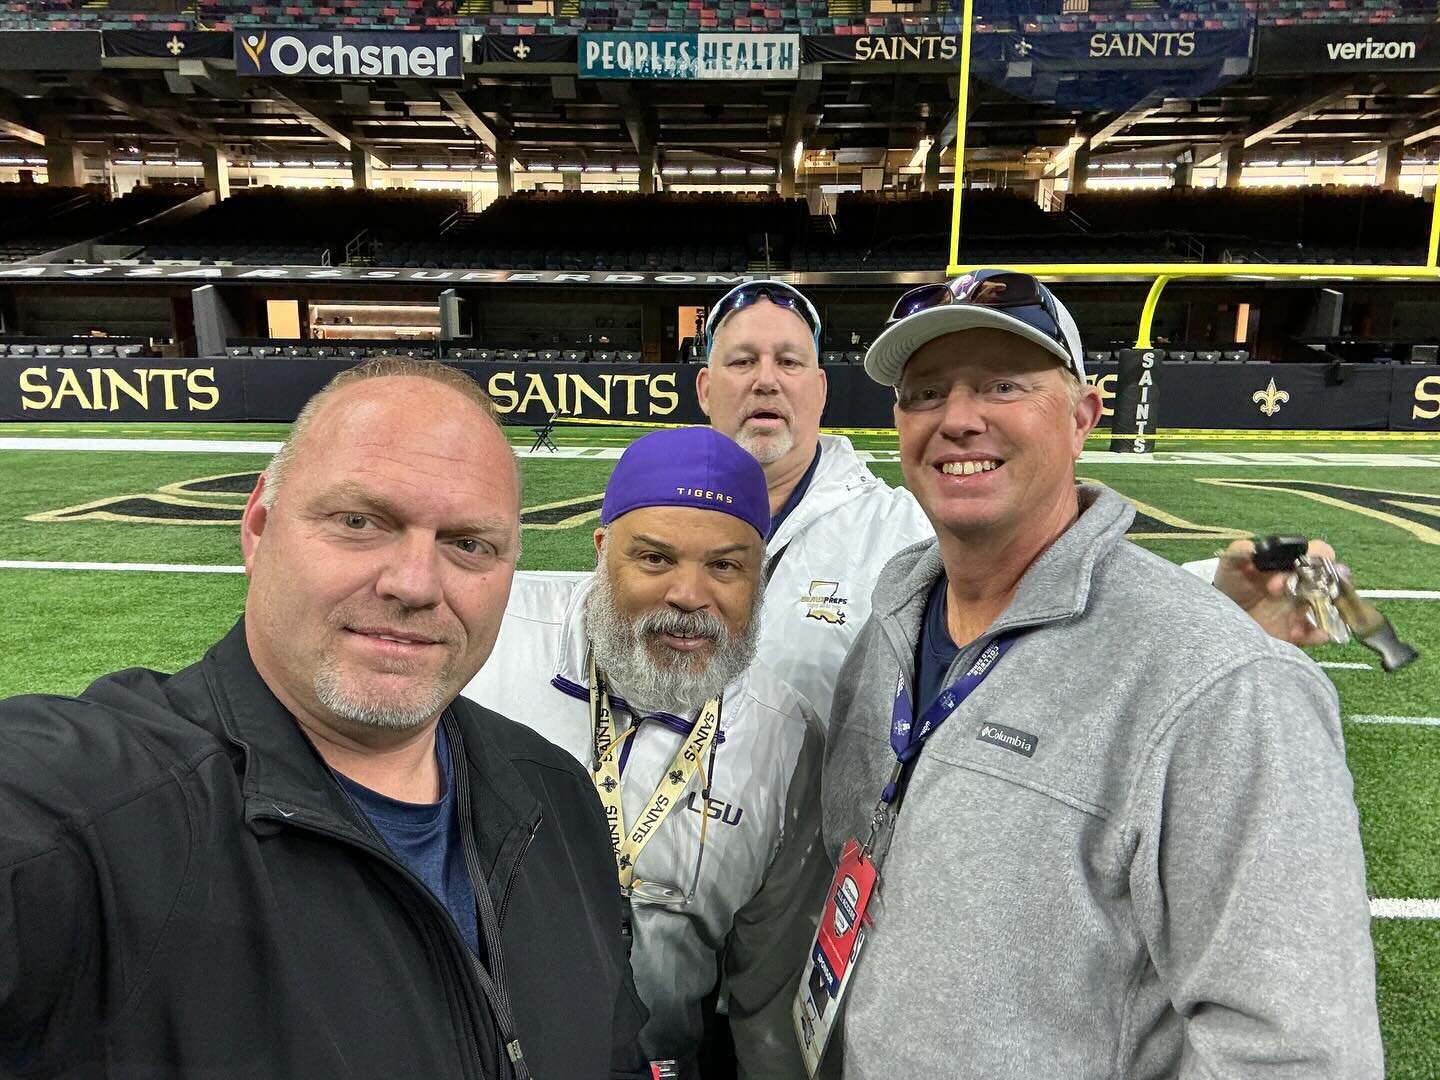 Out at the super dome this weekend photographing the LHSAA State High School Football Championships. Whoop.  @deanharrellphotography @coachogamedaygraphix @natebell